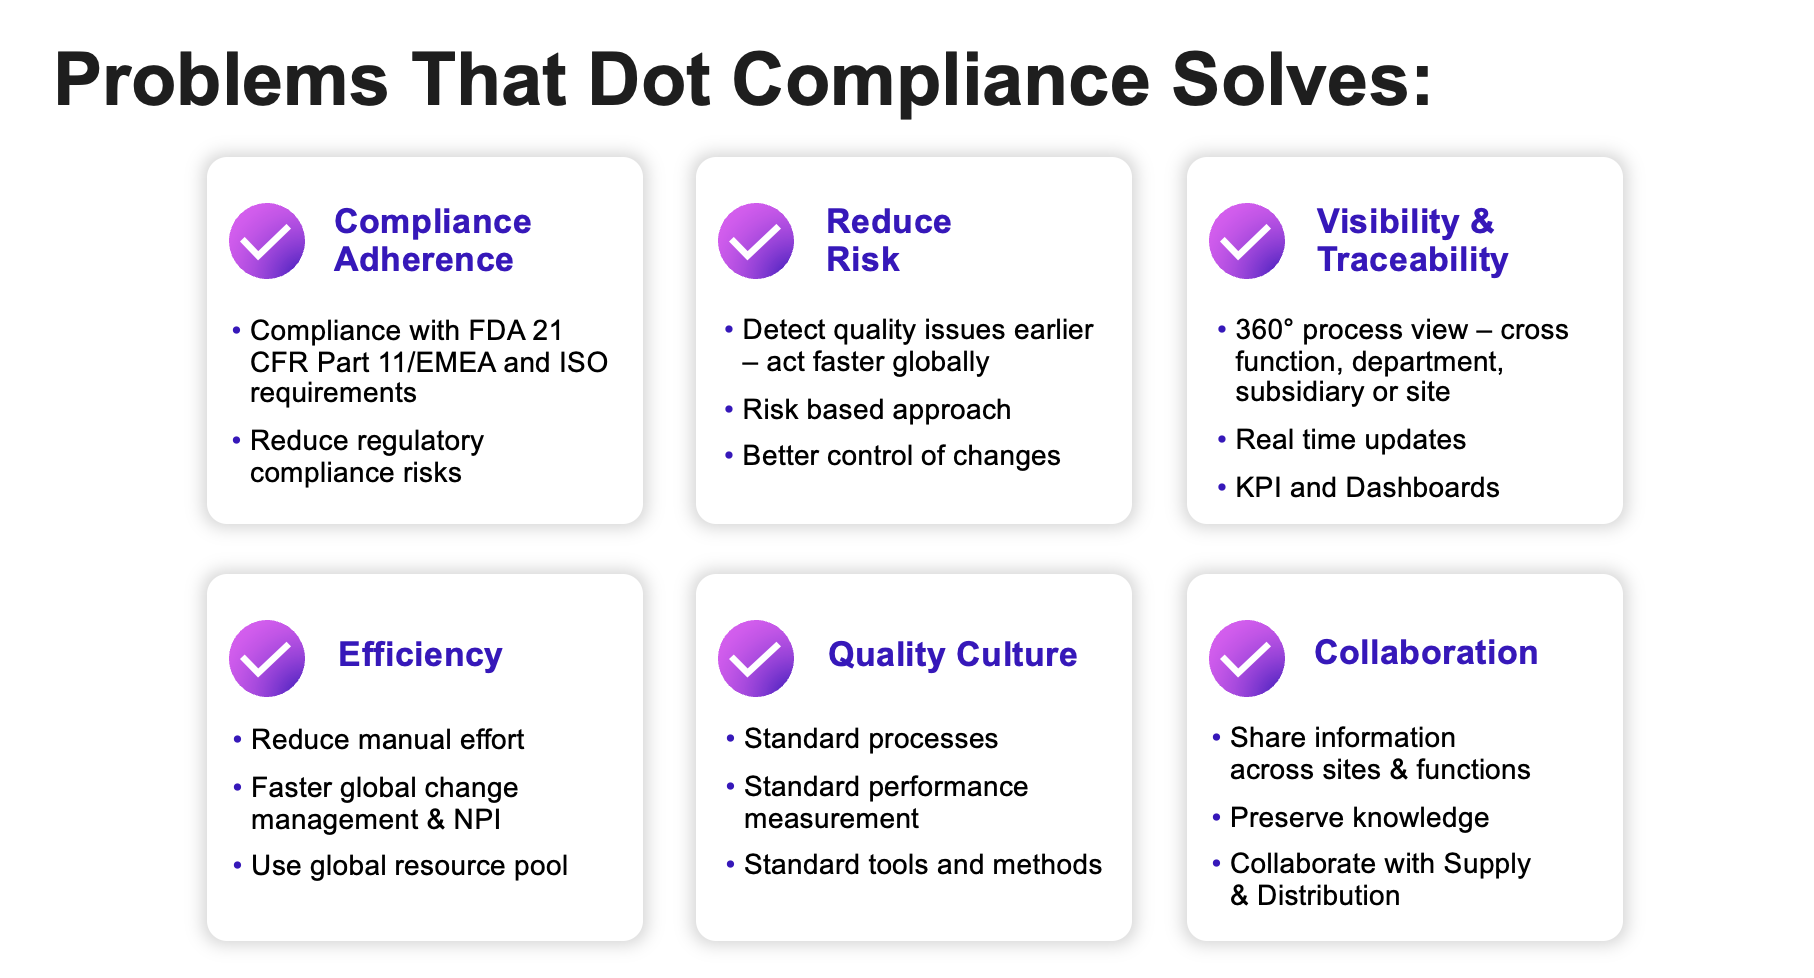 Dot Compliance Software - We help companies navigate the ever changing landscape of implementing electronic quality management systems. We are a team of top experts in enterprise software technology, quality and compliance regulation, and process engineering.